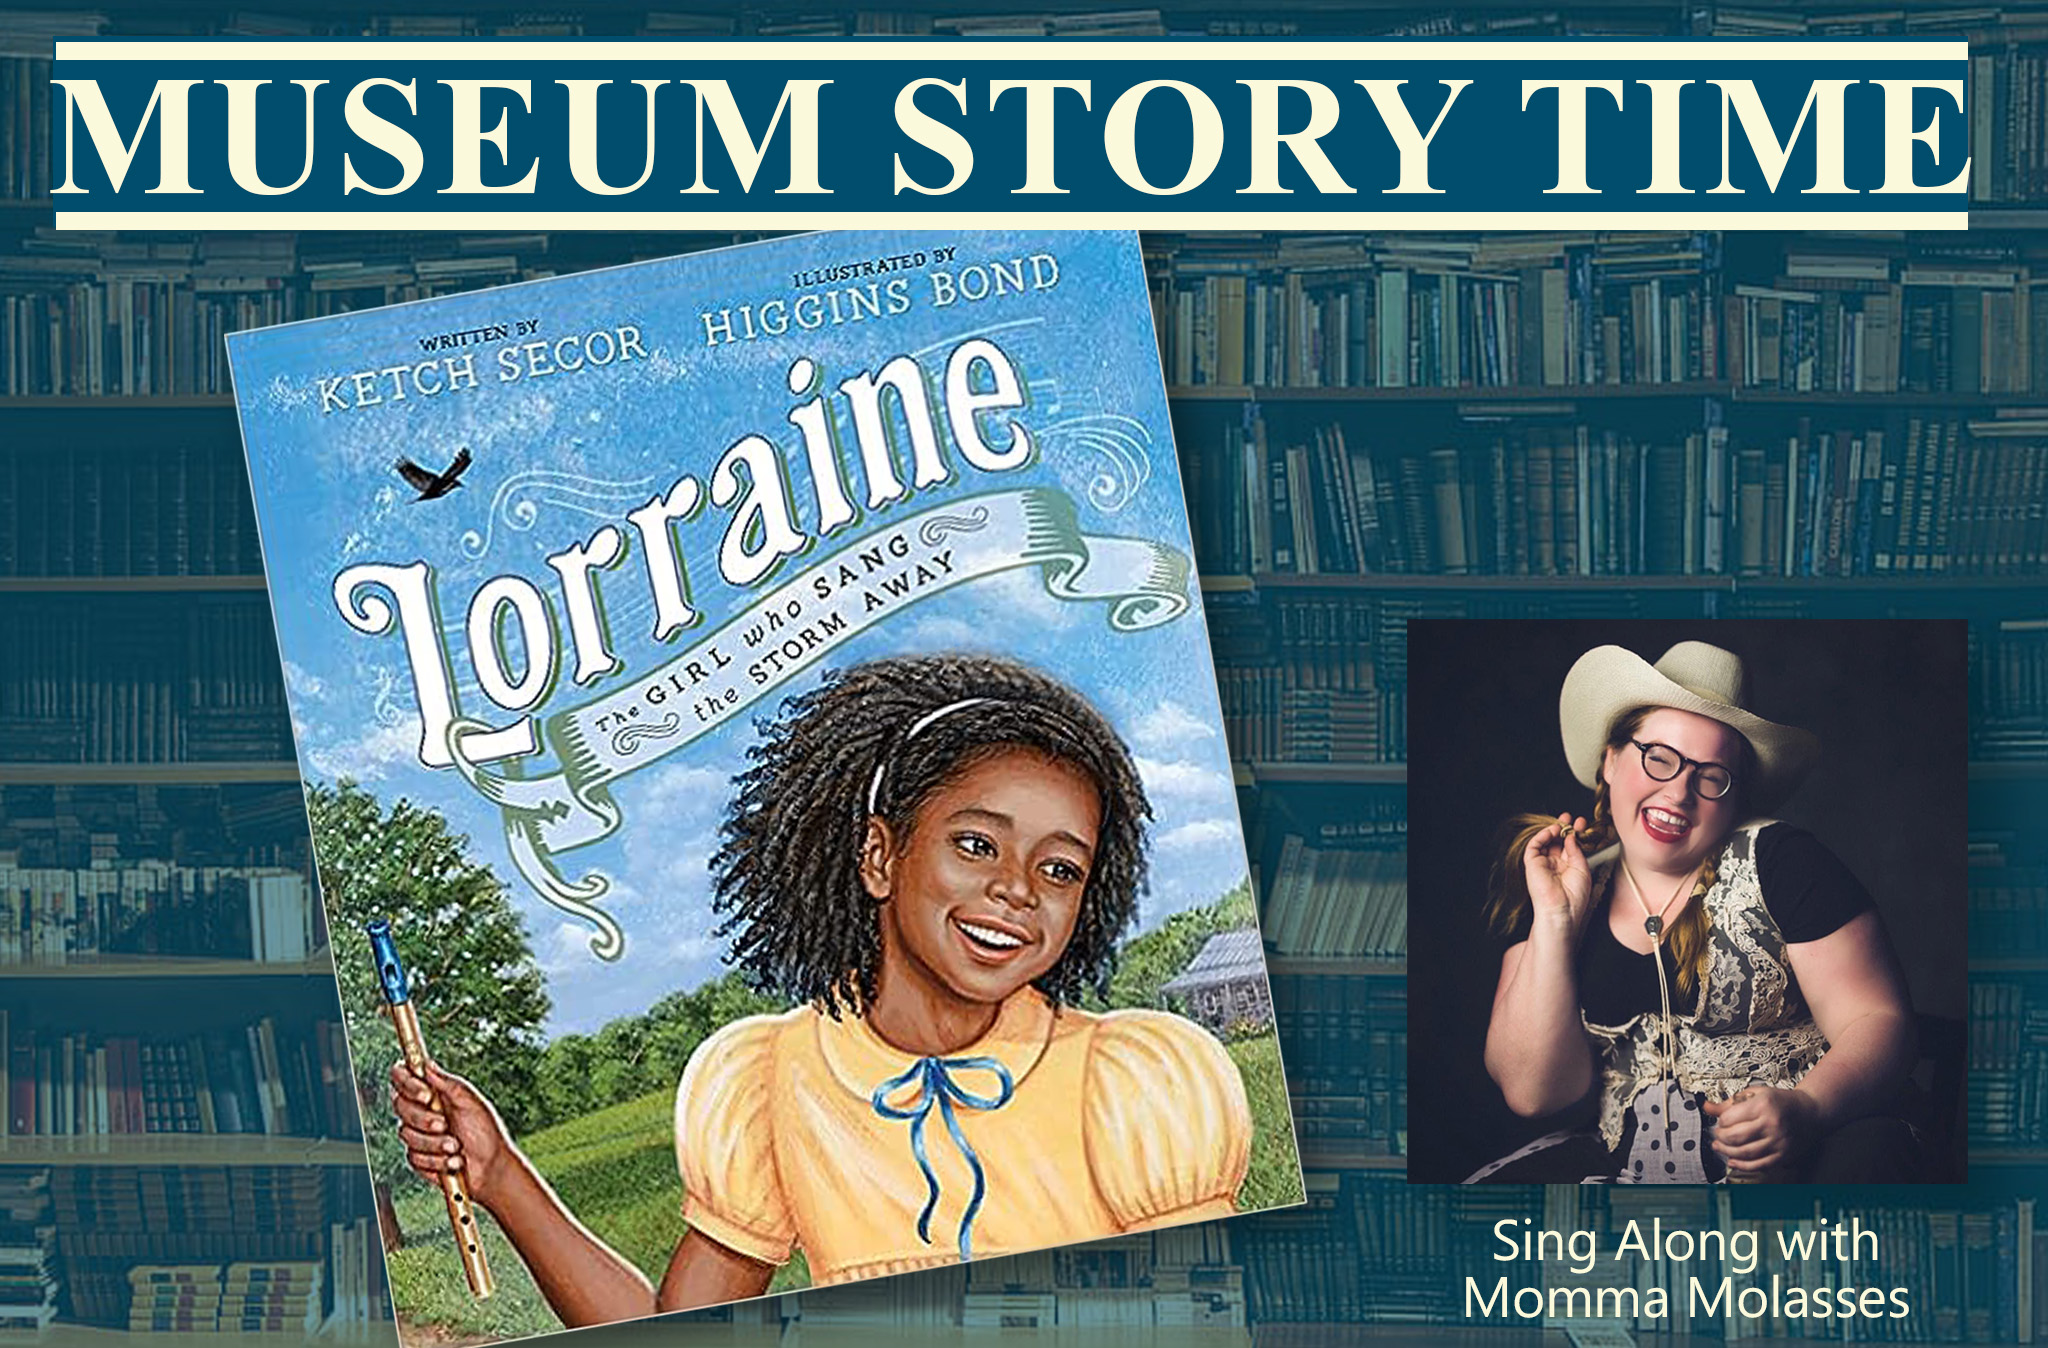 Museum Story Time graphic with the book cover of Lorraine, featuring a young black girl. Beside the book cover is a photo of Momma Molasses wearing a cowboy hat.